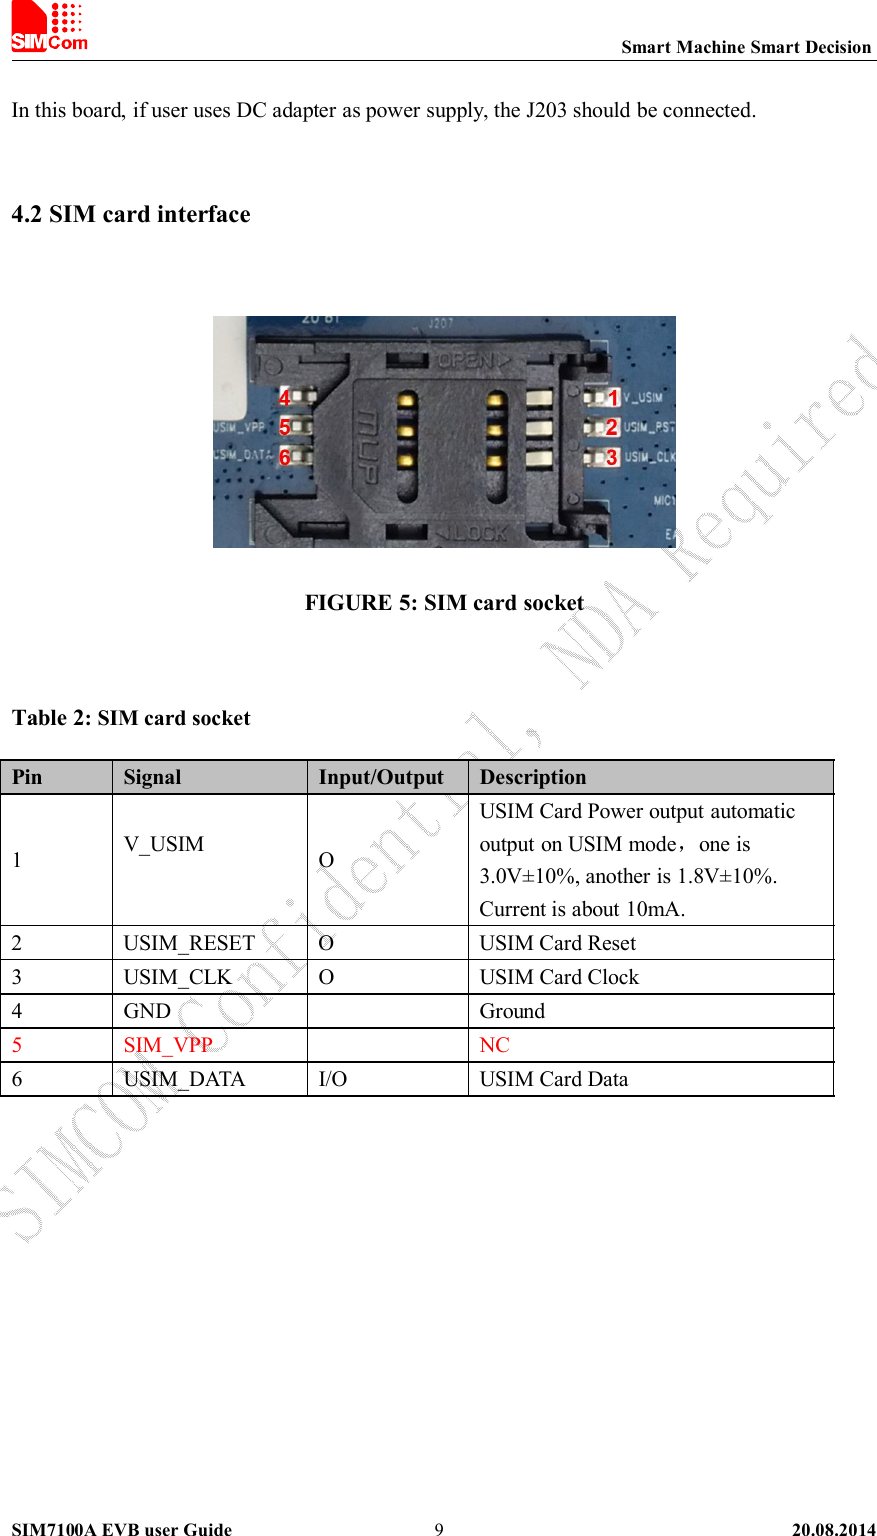 Smart Machine Smart DecisionSIM7100A EVB user Guide 20.08.20149In this board, if user uses DC adapter as power supply, the J203 should be connected.4.2 SIM card interfaceFIGURE 5: SIM card socketTable 2: SIM card socketPin Signal Input/Output Description1V_USIM OUSIM Card Power output automaticoutput on USIM mode，one is3.0V±10%, another is 1.8V±10%.Current is about 10mA.2 USIM_RESET O USIM Card Reset3 USIM_CLK O USIM Card Clock4 GND Ground5 SIM_VPP NC6 USIM_DATA I/O USIM Card Data